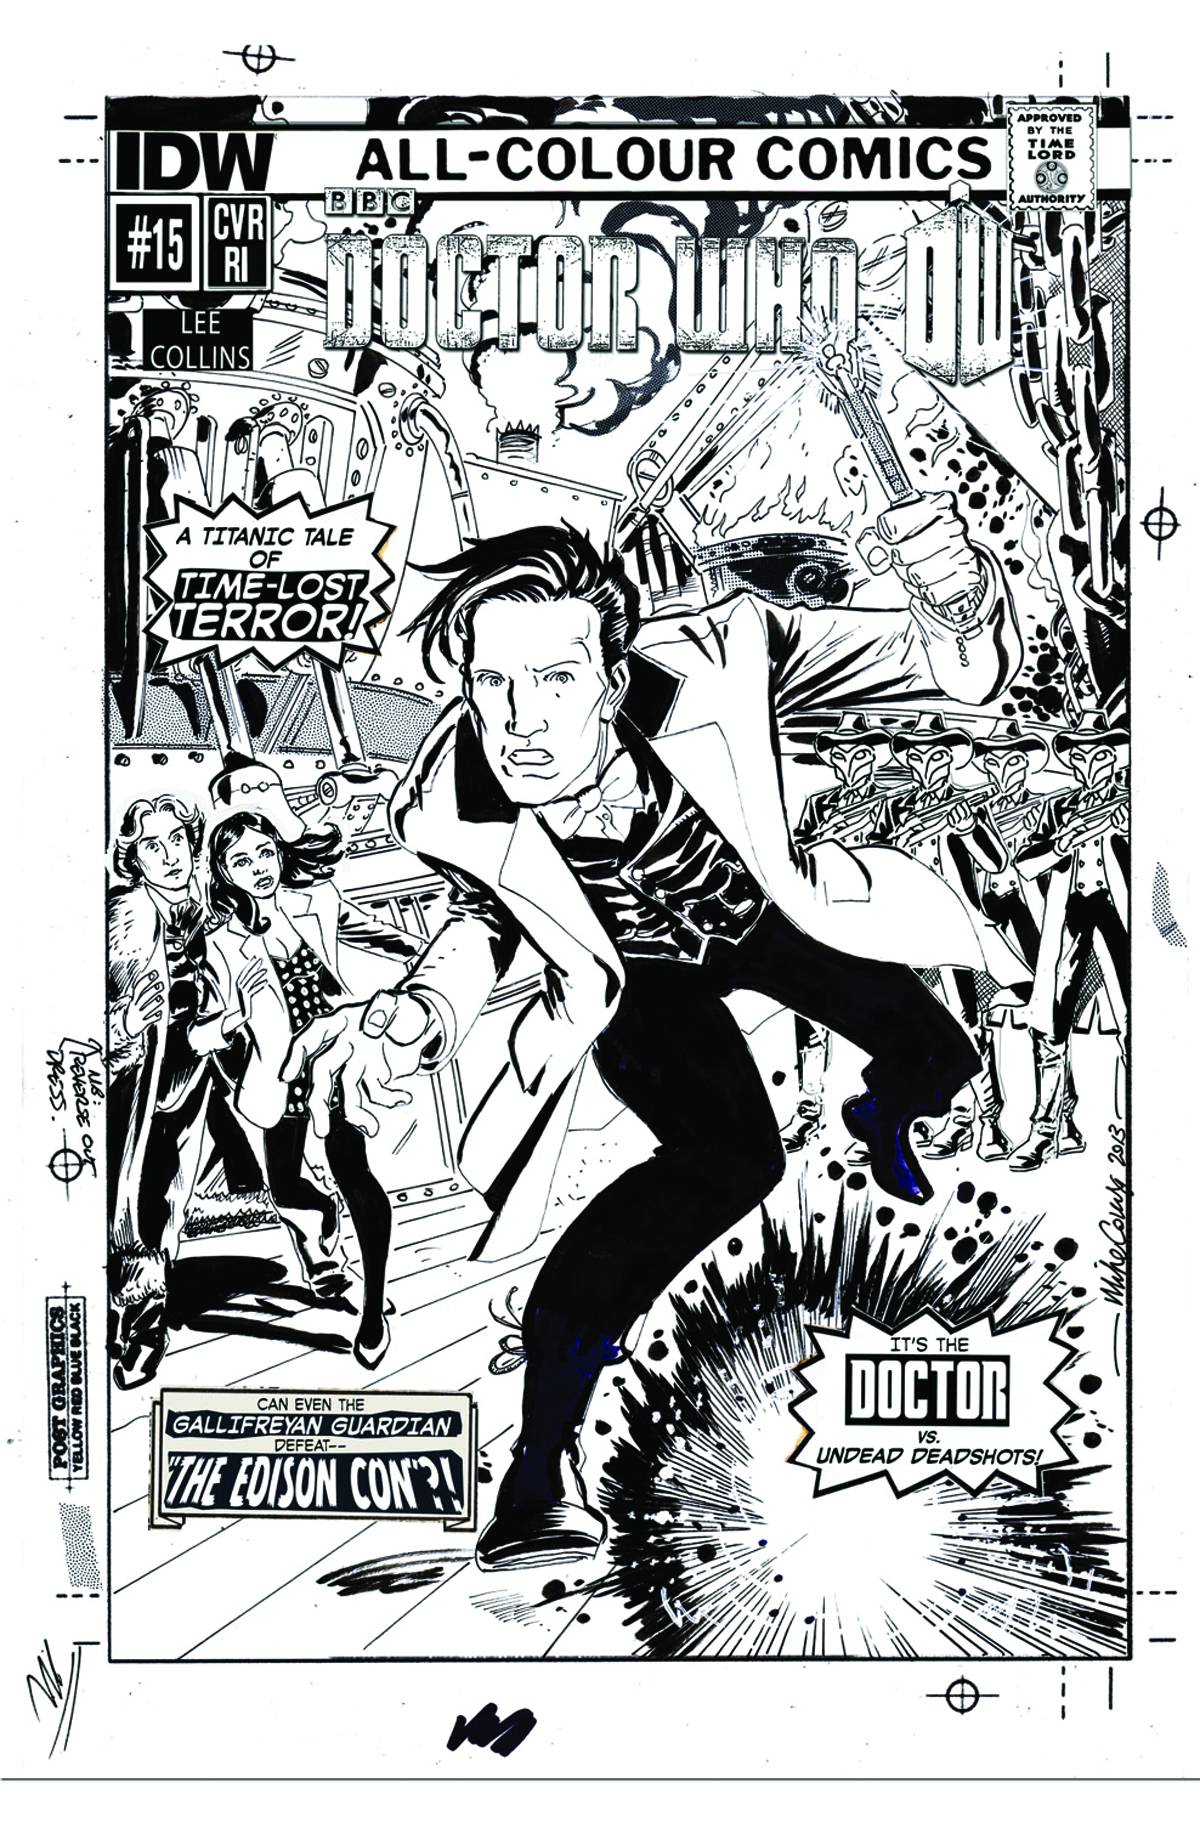 Doctor Who Volume 3 #15 Subscription Variant